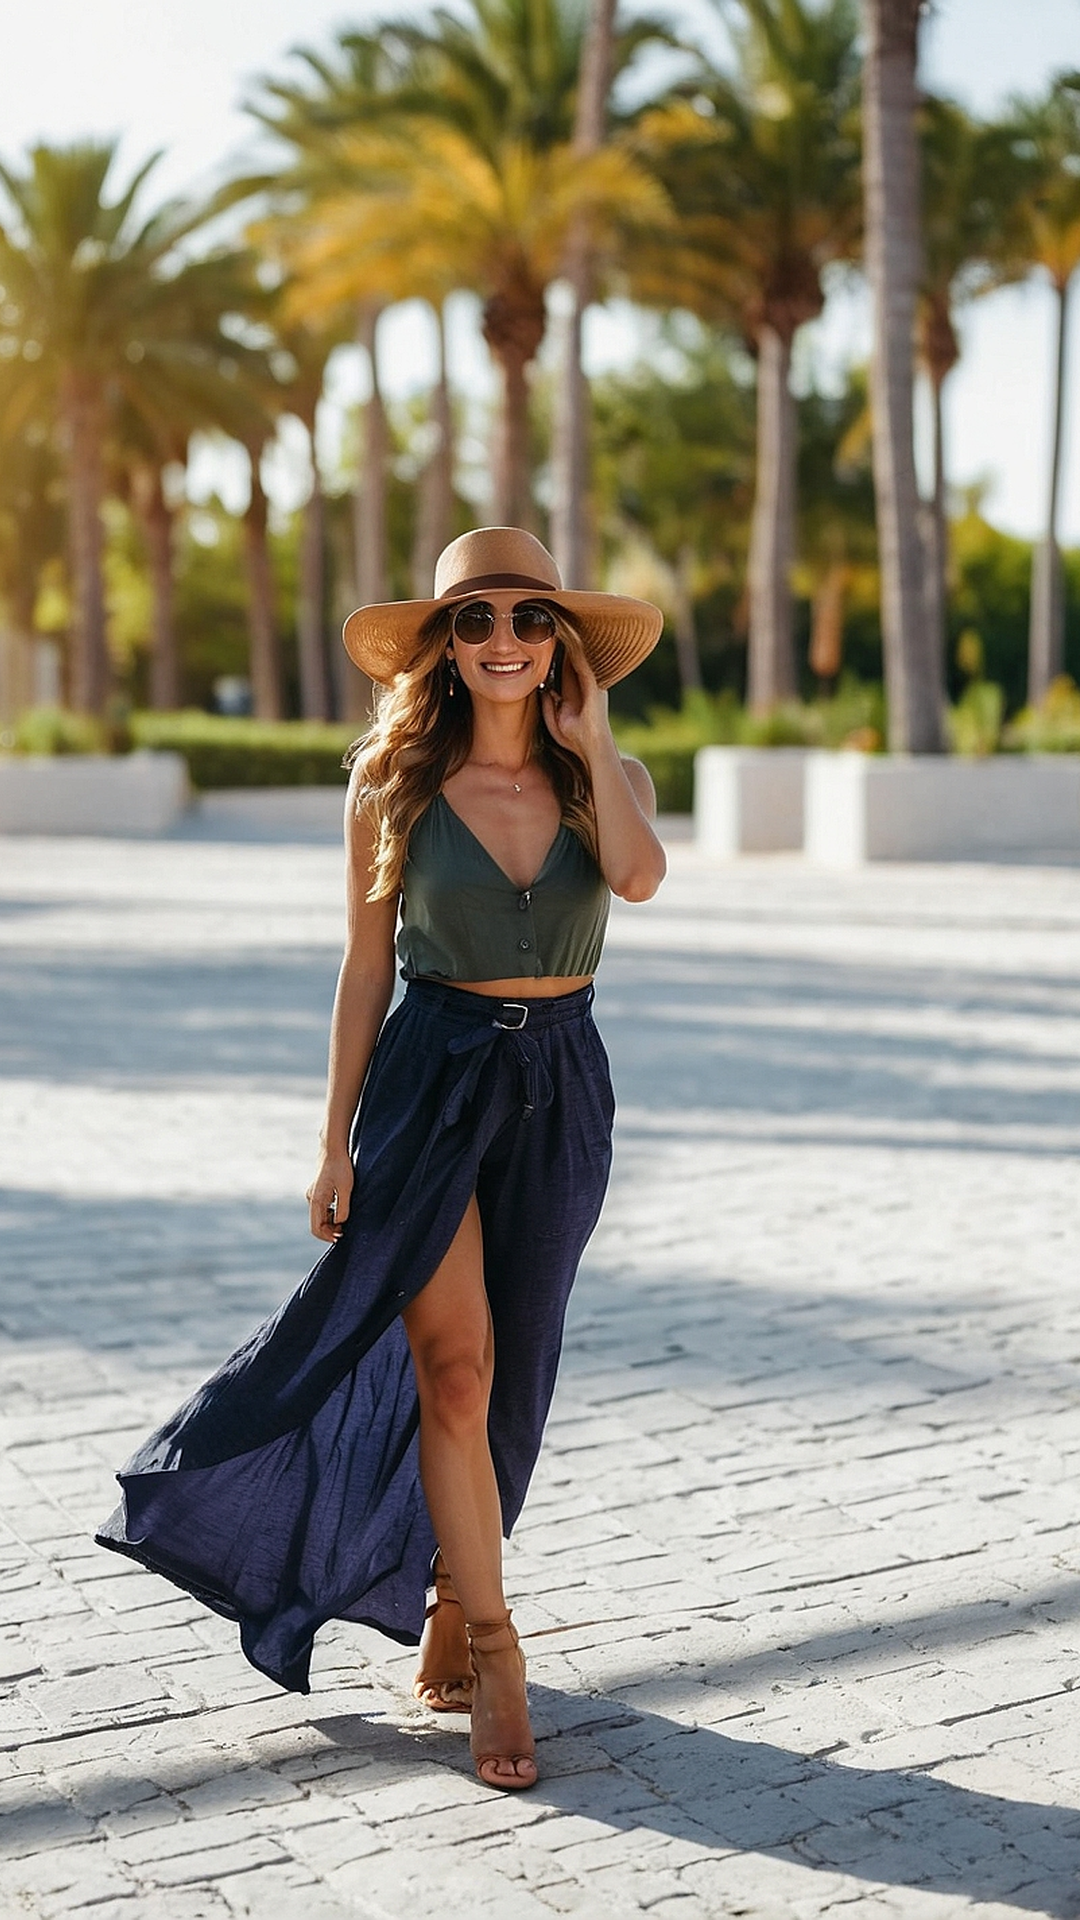 Boho Beauty: Pretty Woman's Summer Outfit Inspirations